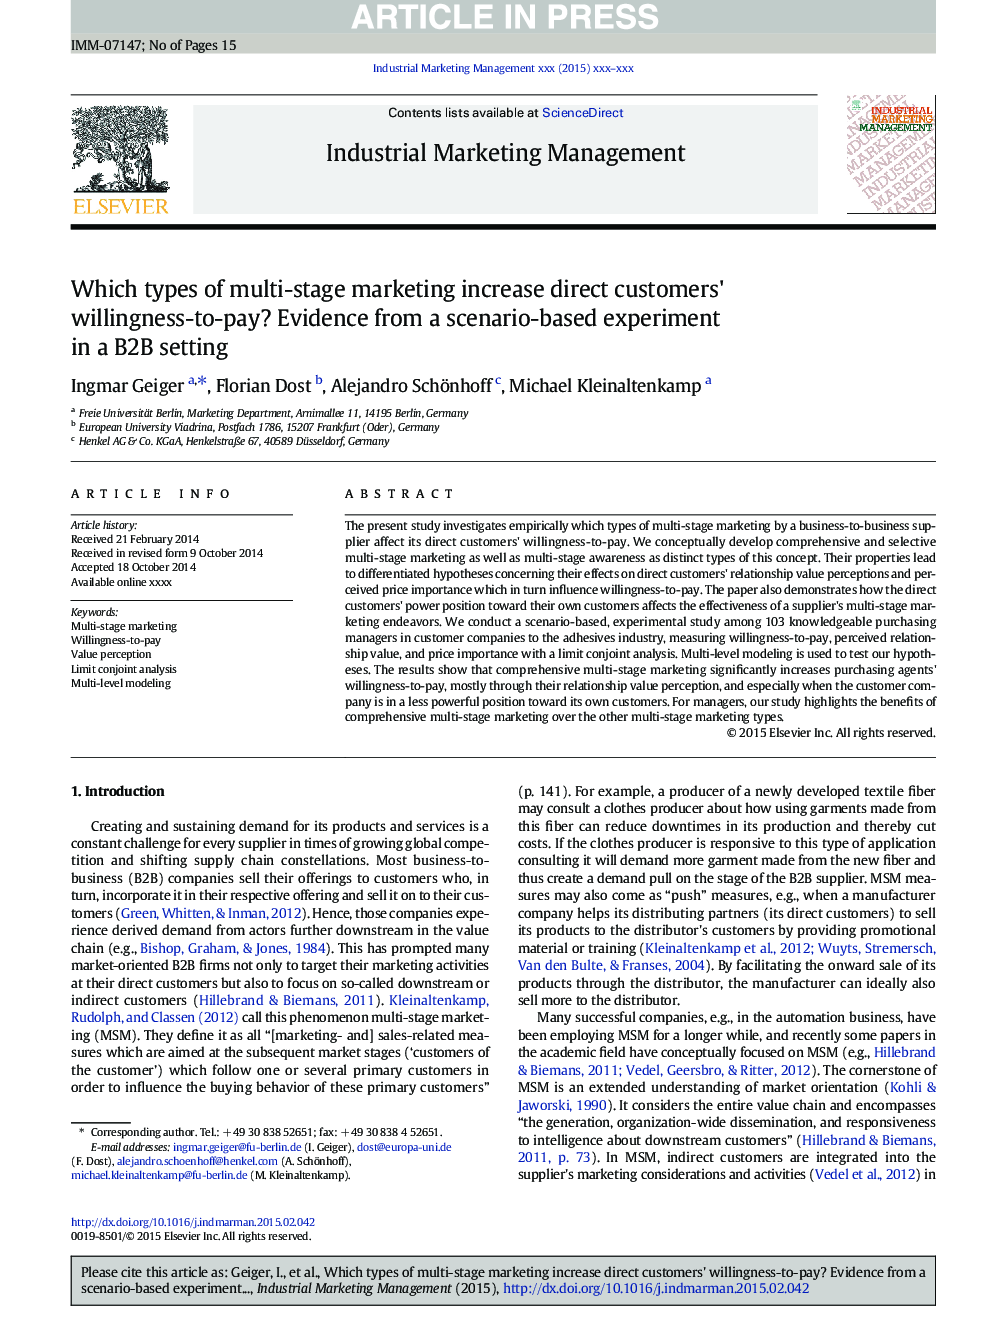 Which types of multi-stage marketing increase direct customers' willingness-to-pay? Evidence from a scenario-based experiment in a B2B setting